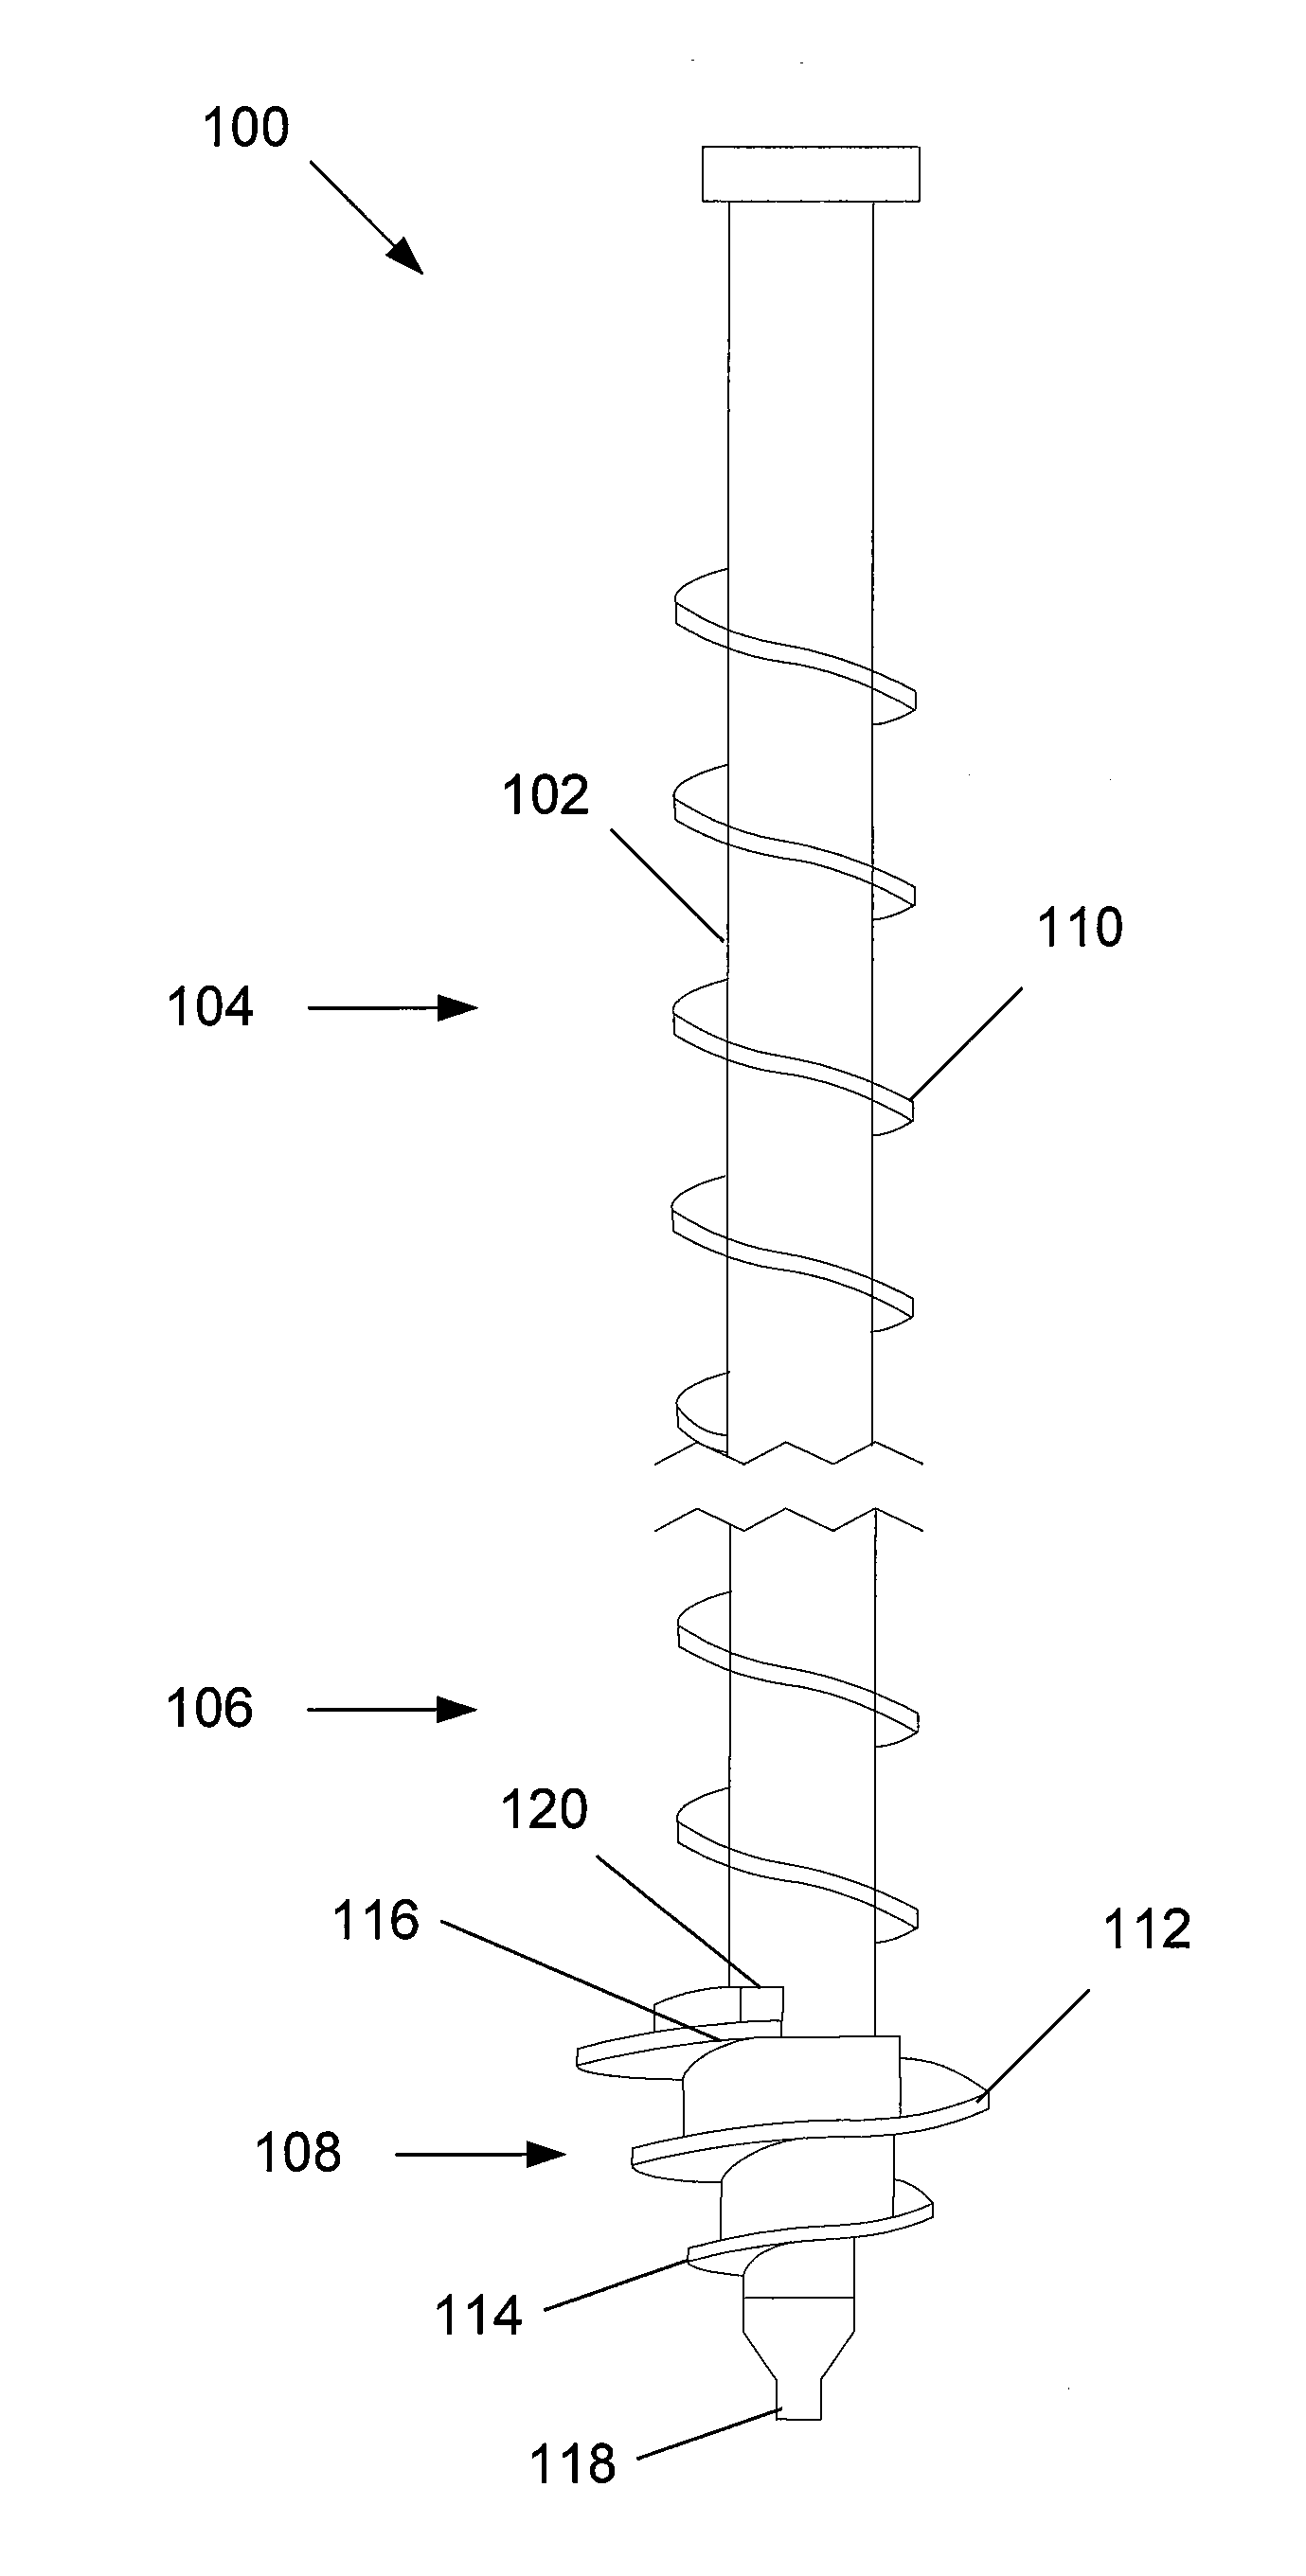 Auger grouted displacement pile